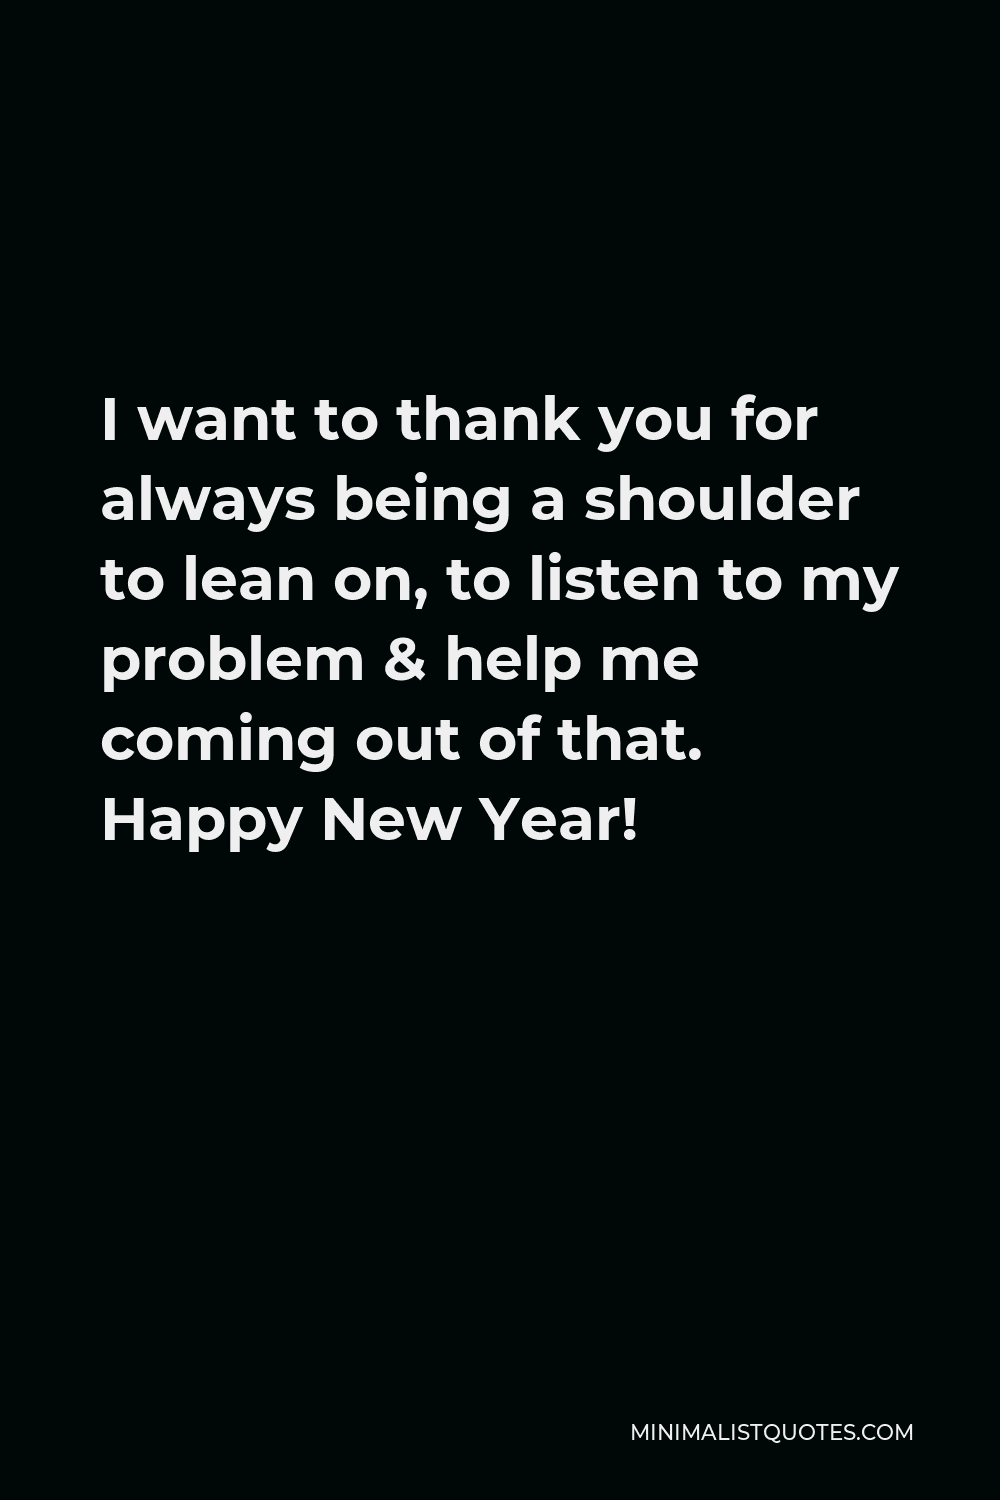 I Want To Thank You For Always Being A Shoulder To Lean On To Listen To My Problem Help Me Coming Out Of That Happy New Year